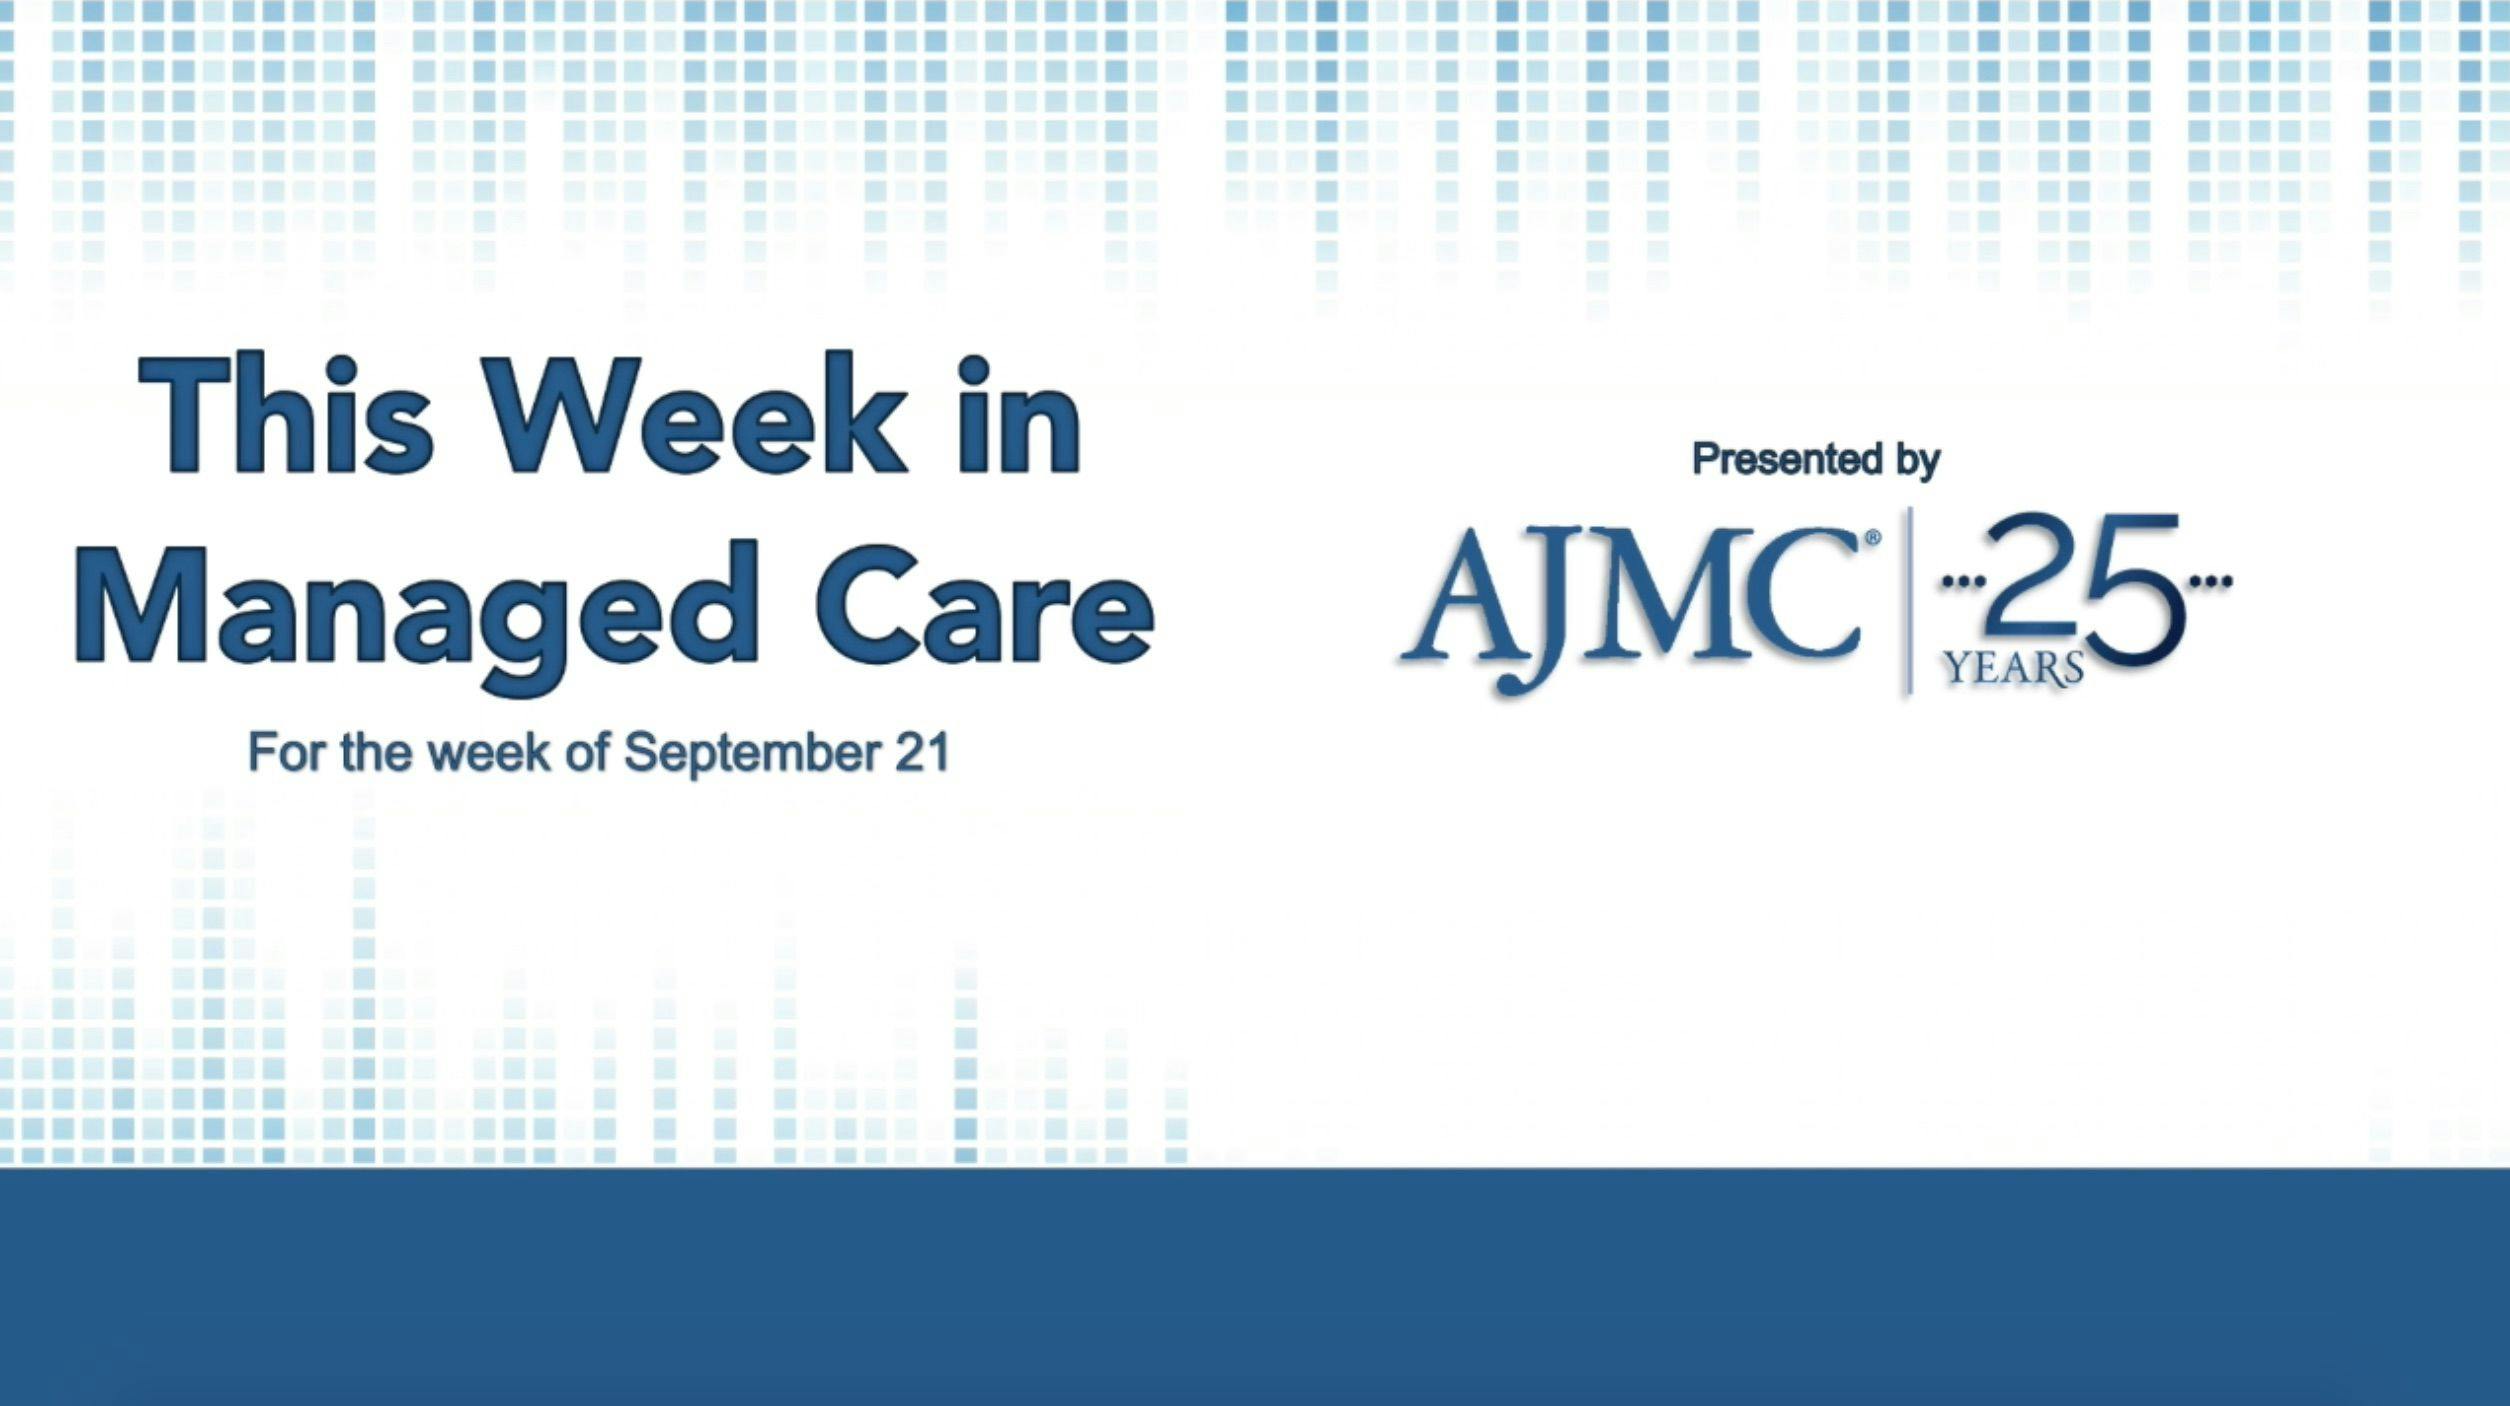 This Week in Managed Care: September 25, 2020